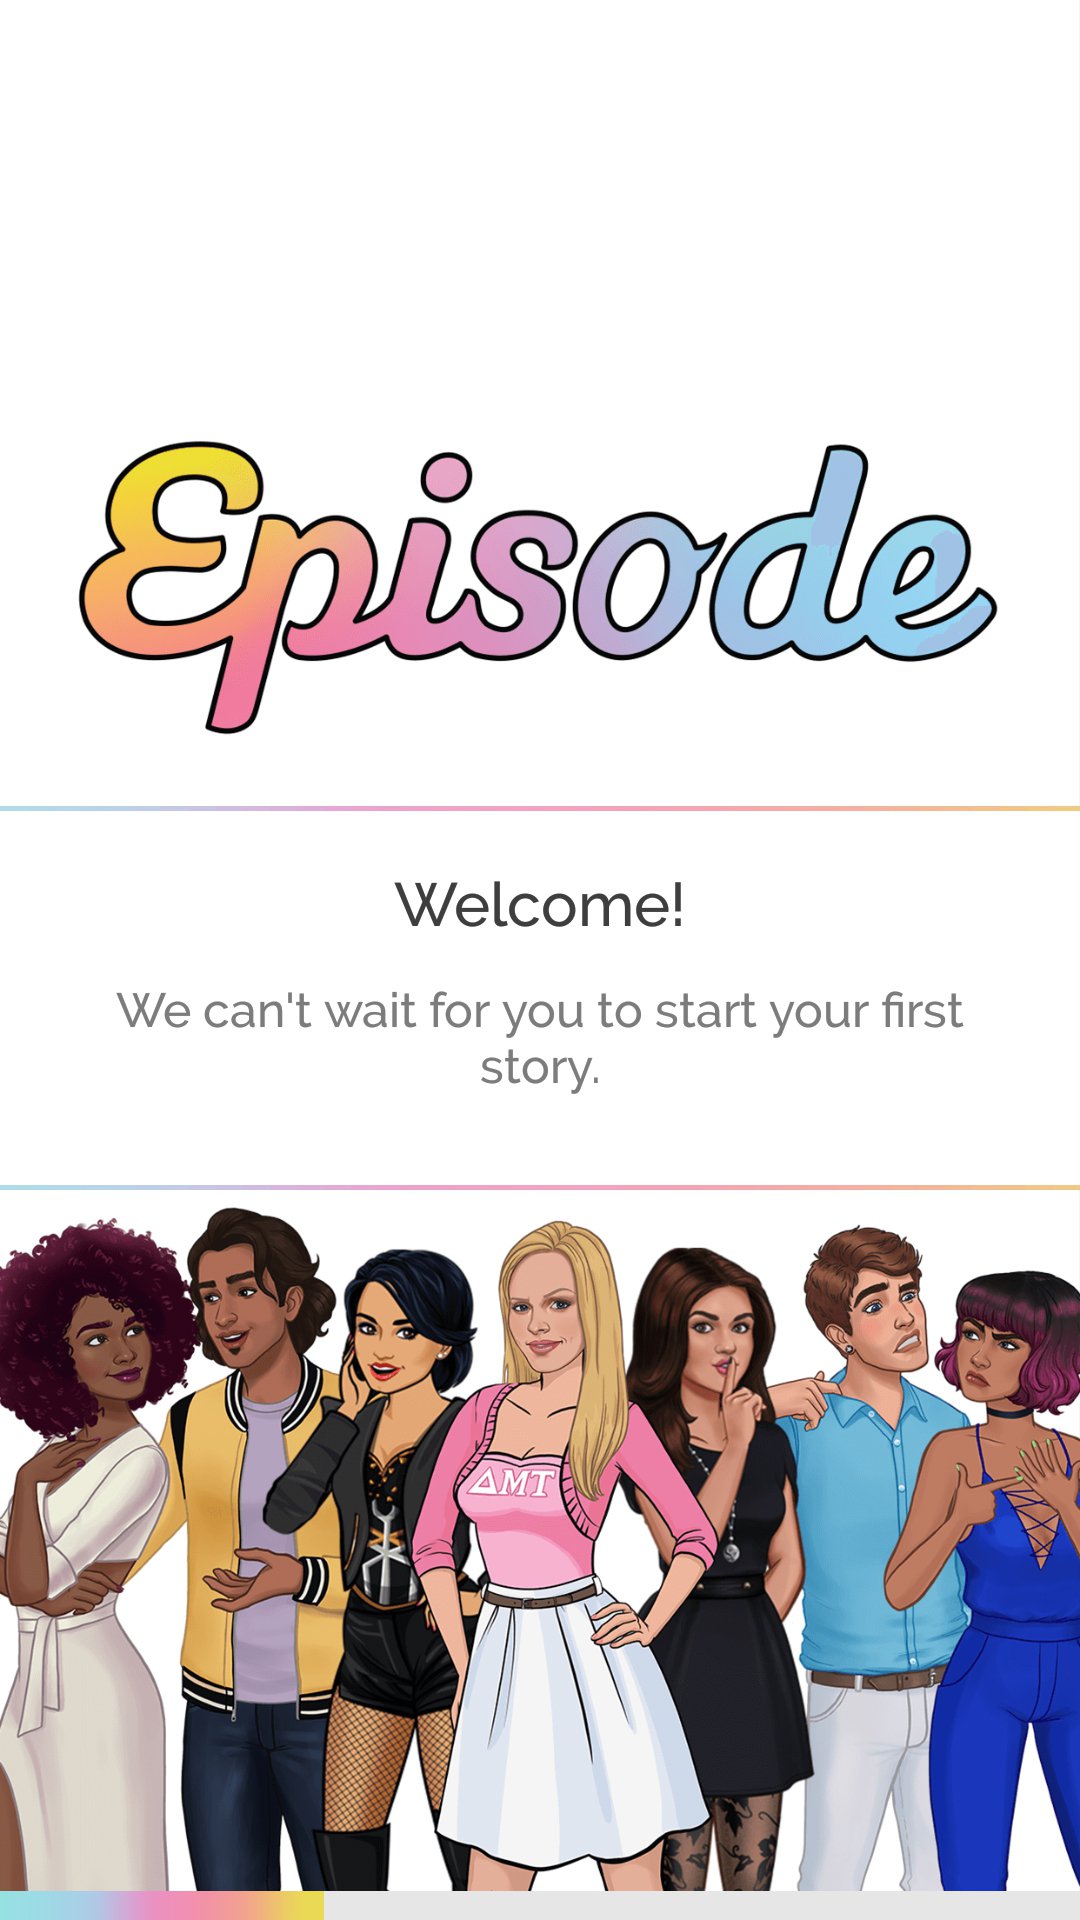 Episode choose your story for computer